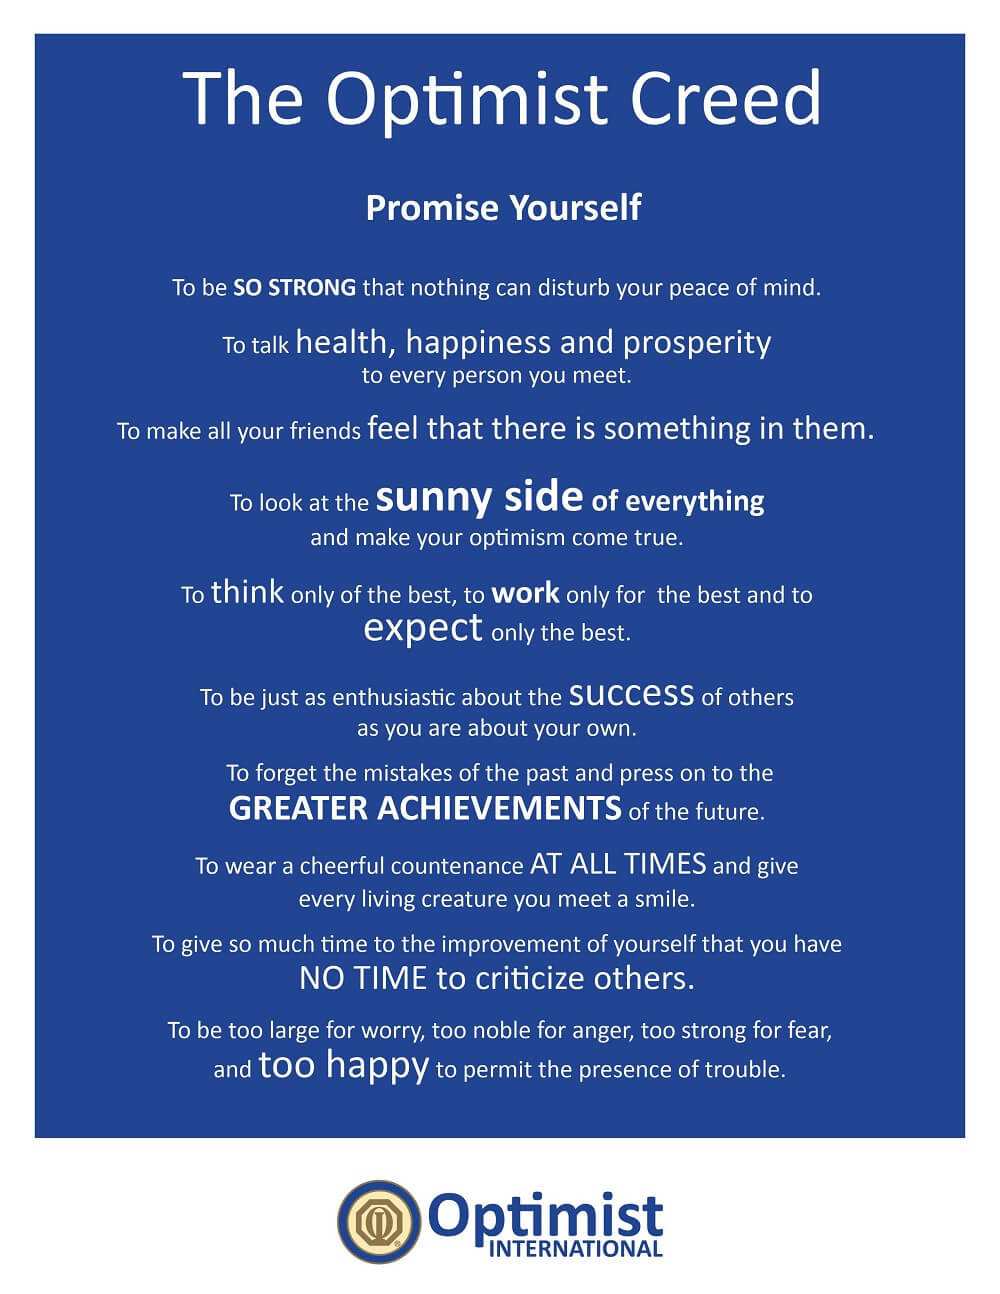 Inspiring Optimist Creed poster with uplifting affirmations for a positive mindset